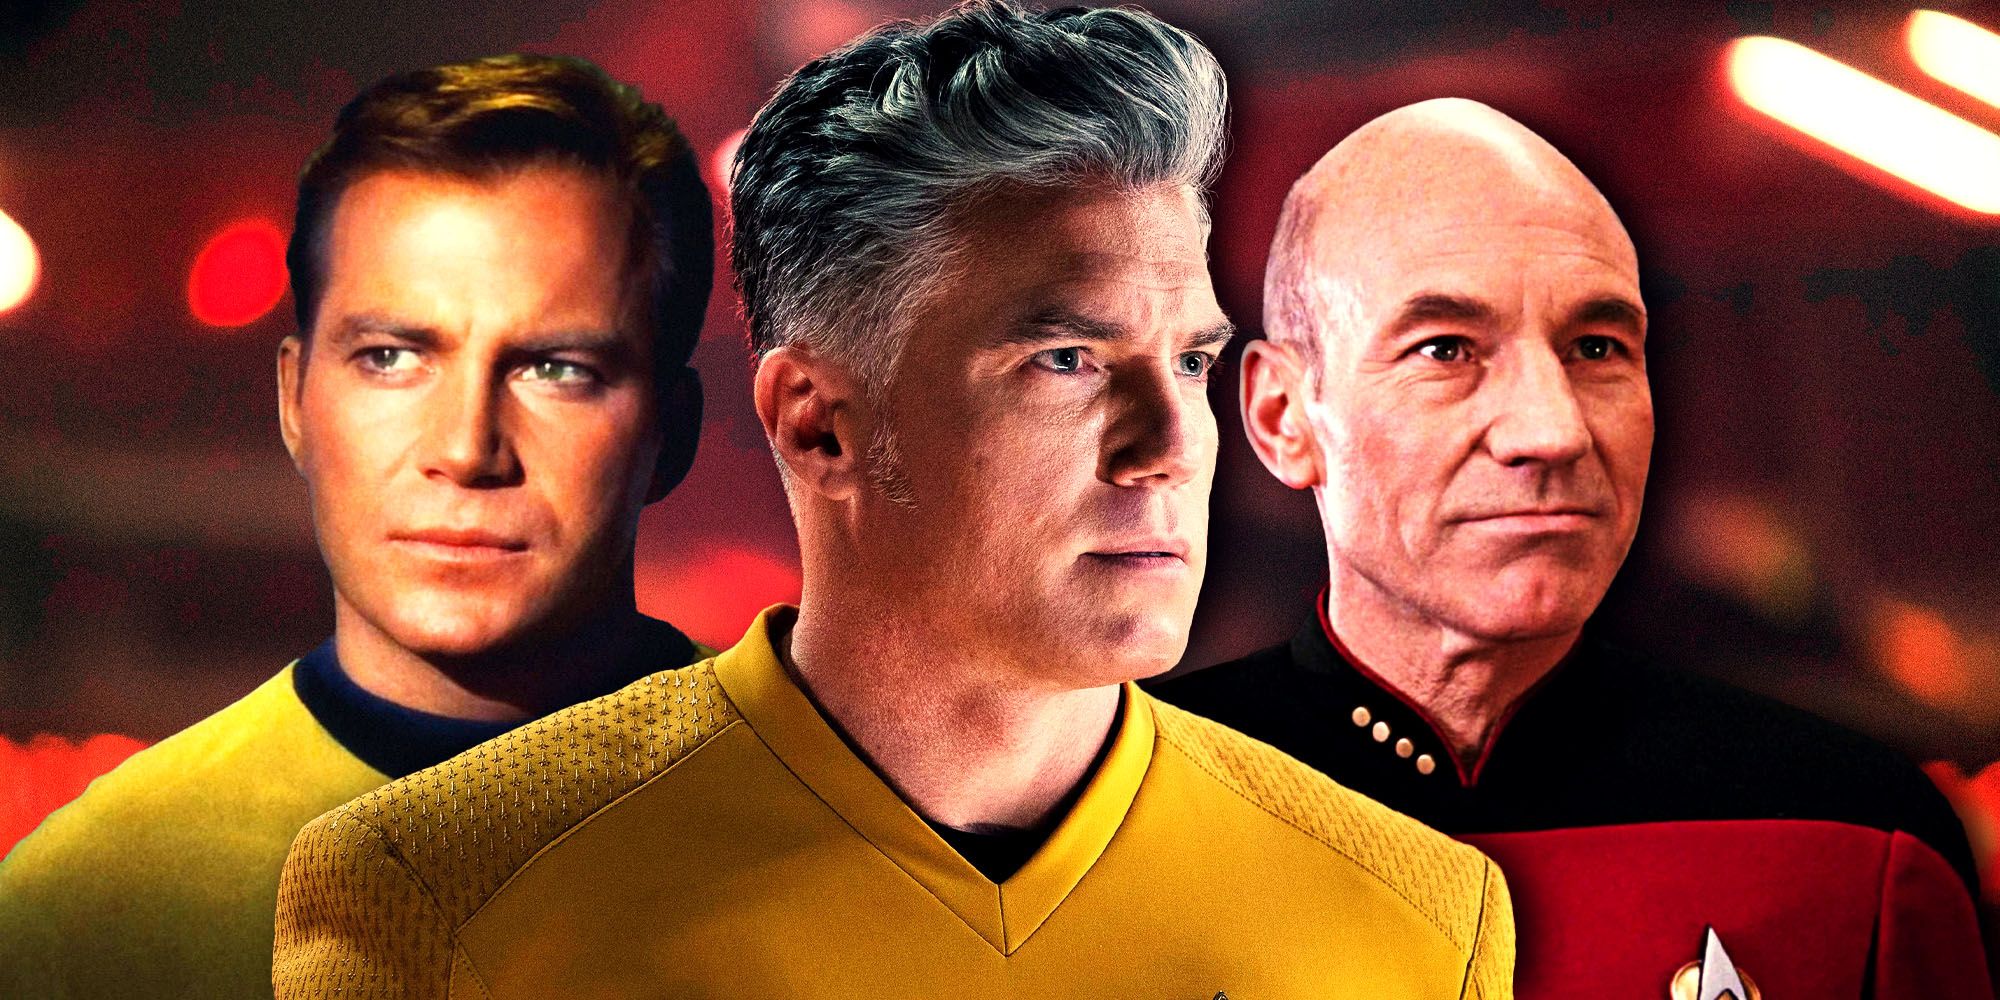 Picard Almost Let A Planet Be Destroyed To Preserve Star Trek: TNG’s Prime Directive